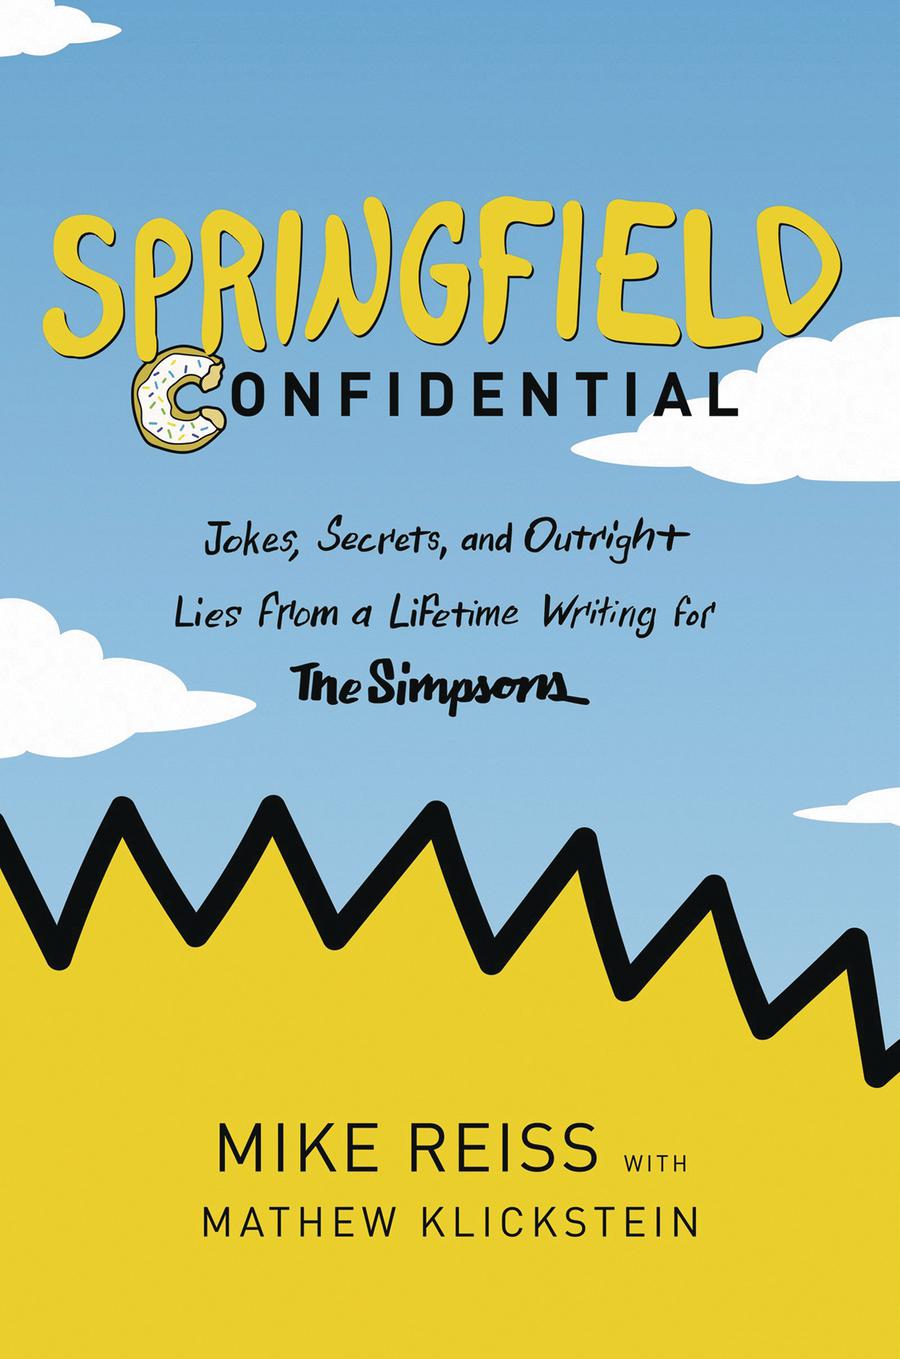 Springfield Confidential Jokes Secrets And Outright Lies From A Lifetime Writing For The Simpsons HC